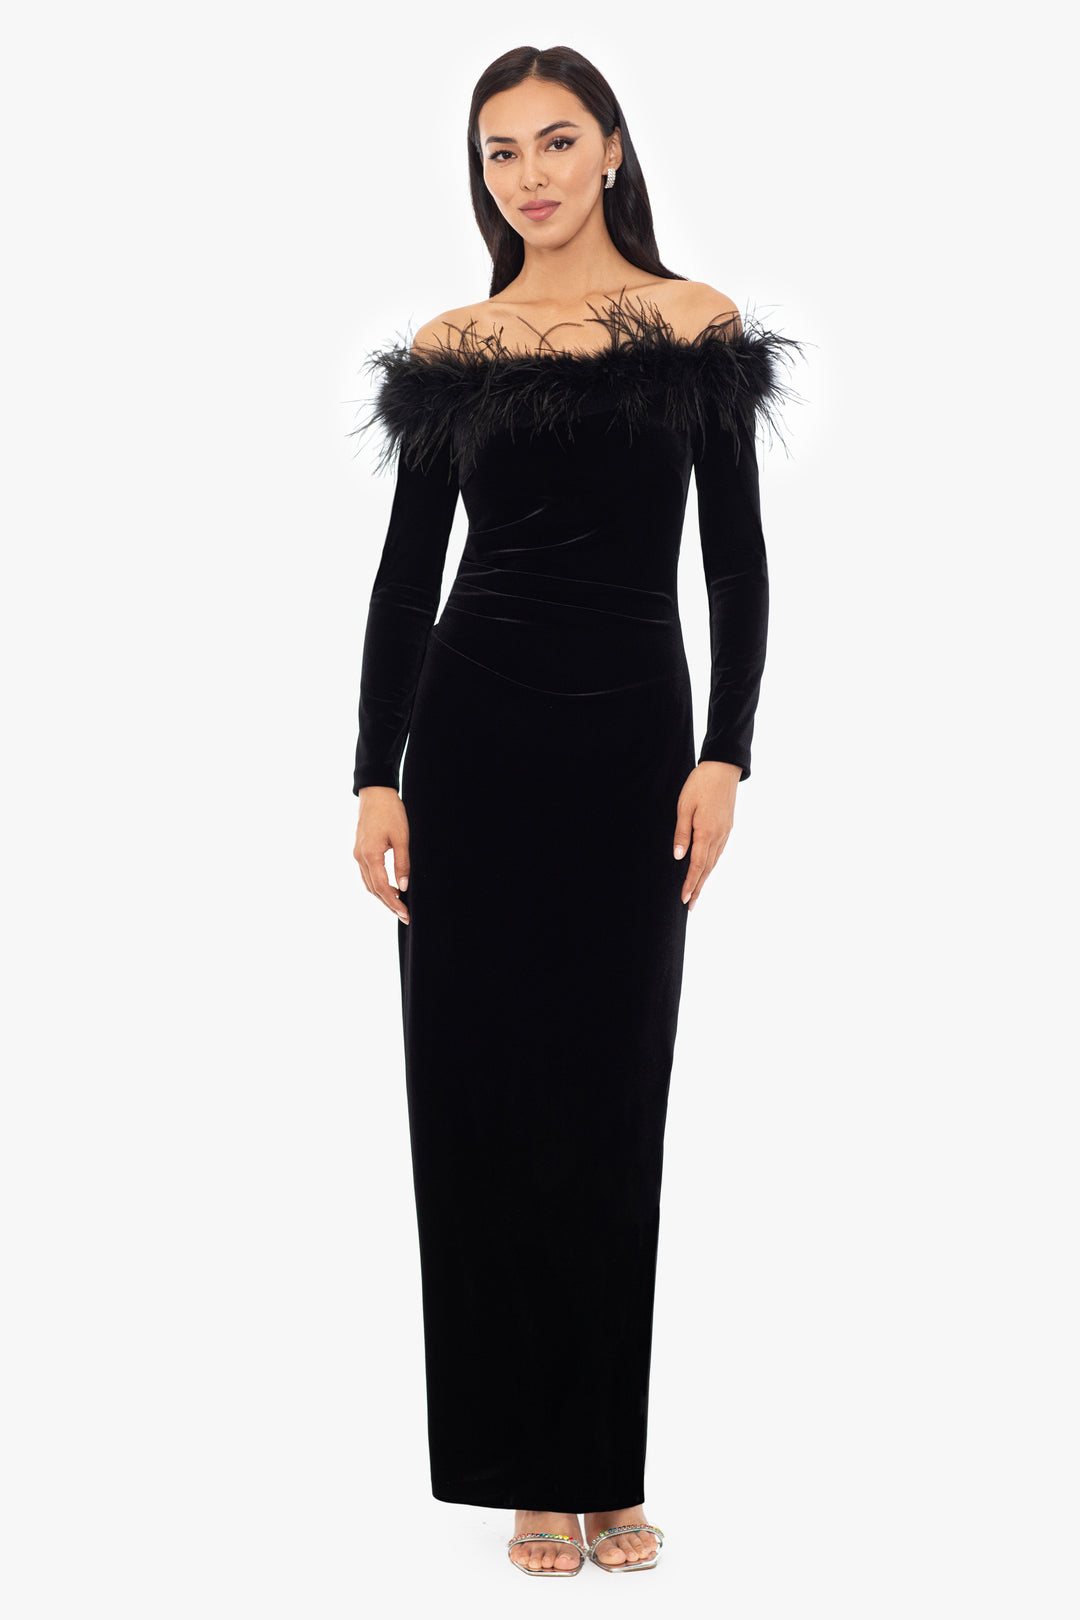 "Esther" Off the Shoulder Long Sleeve Velvet Dress With Feathers